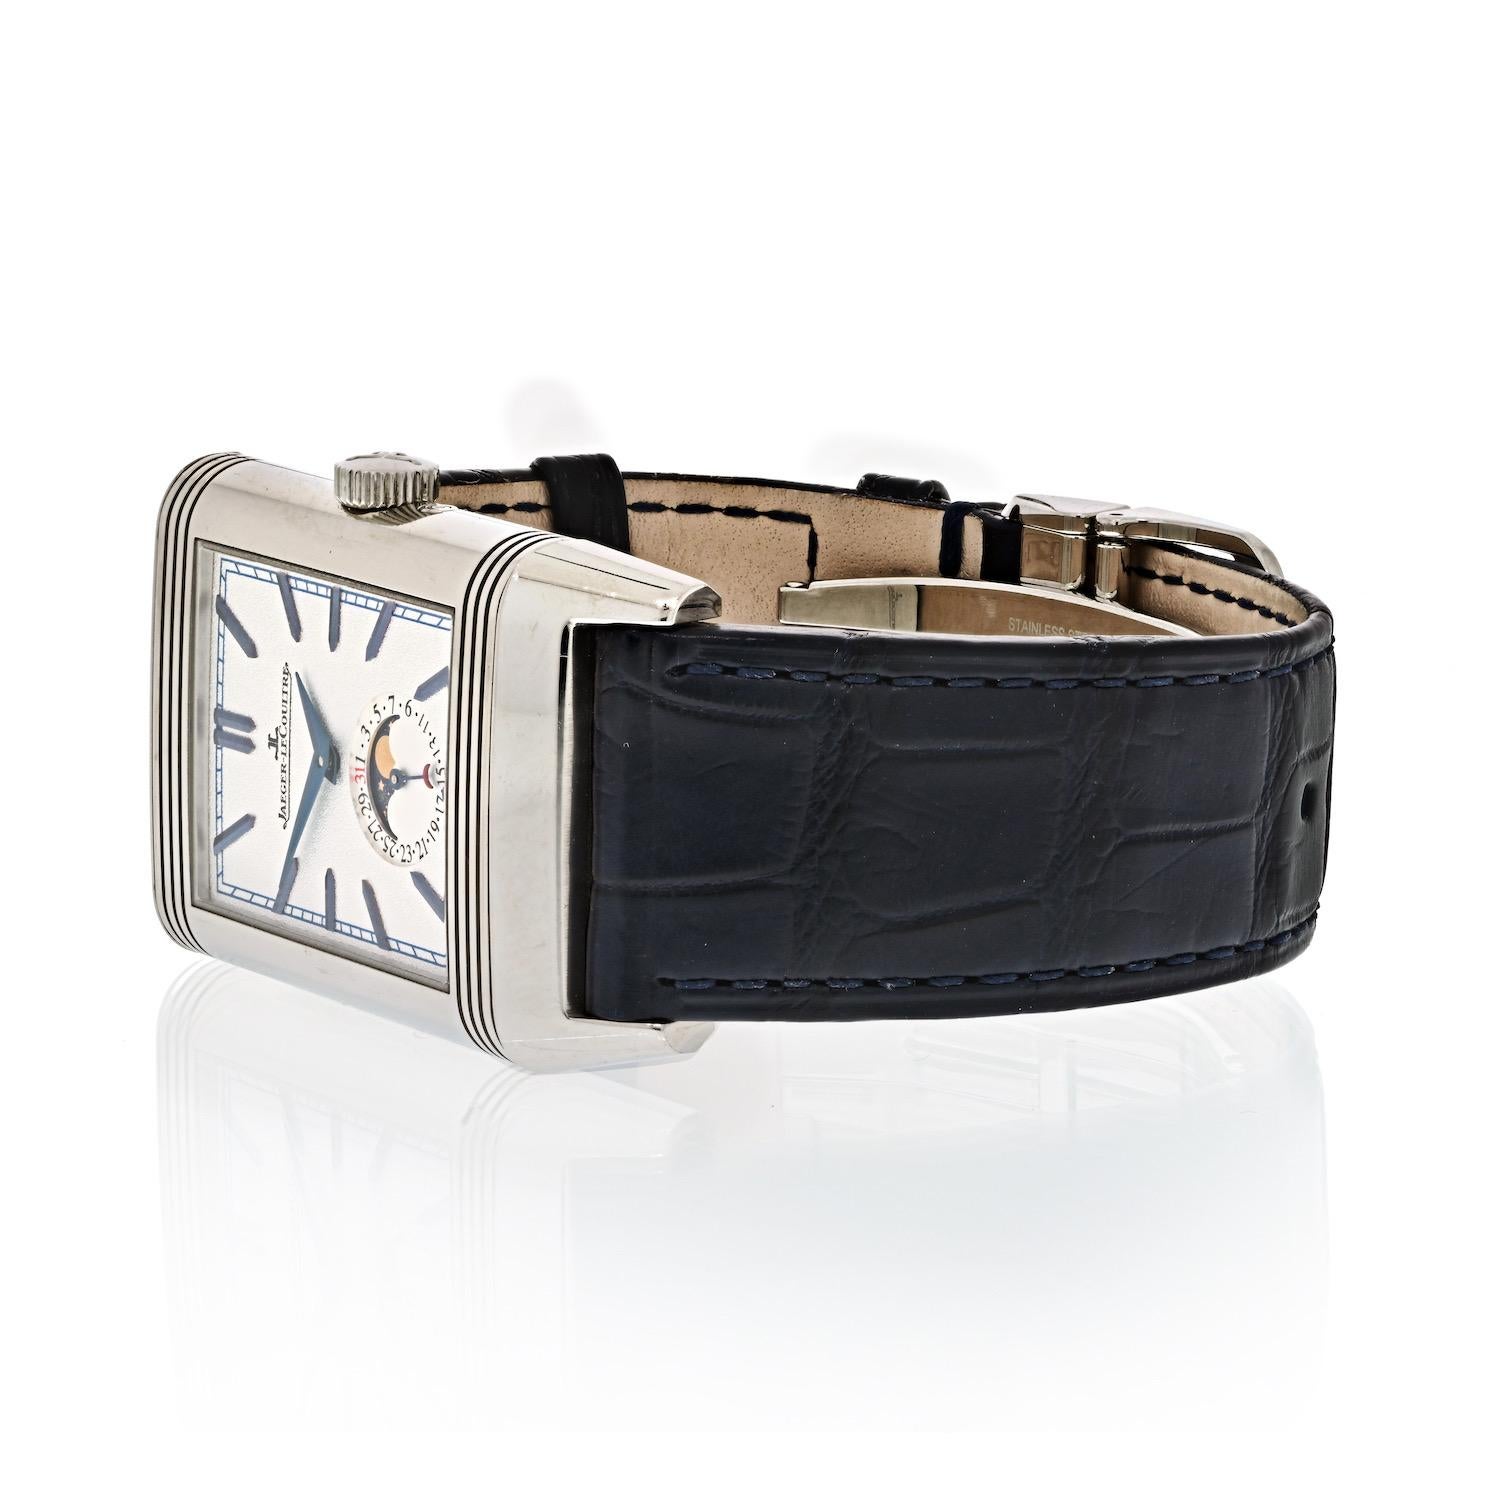 JAEGER-LECOULTRE Reverso Tribute Moon Manual-winding Silver Dial Men's Watch.
Another top collection from Jaeger LeCoultre, its Reverso Tribute Moon (as is in the name) pays homage to the moon cycle and all that it nature. The hour hands are a